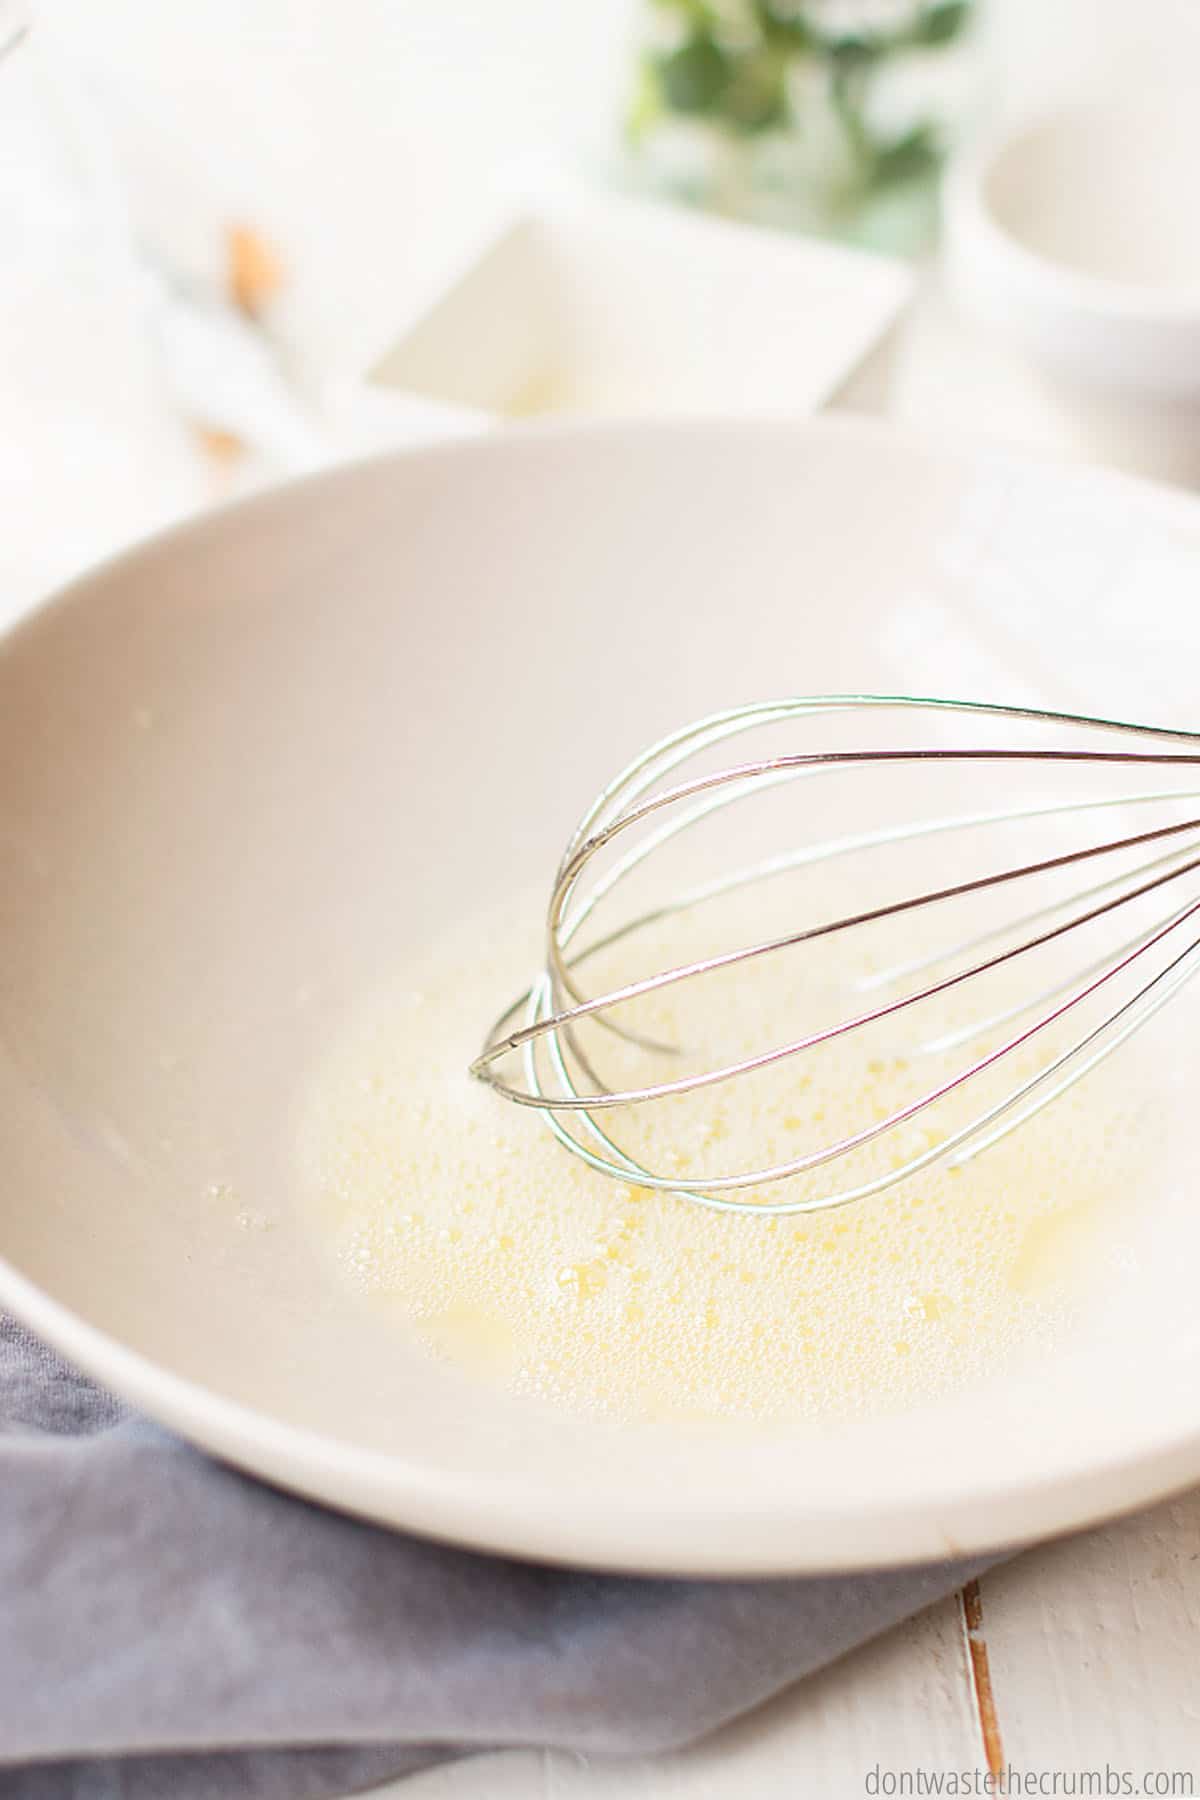 A whisk mixes castile soap, essential oils and aloe vera in a large white bowl to make foaming hand soap.